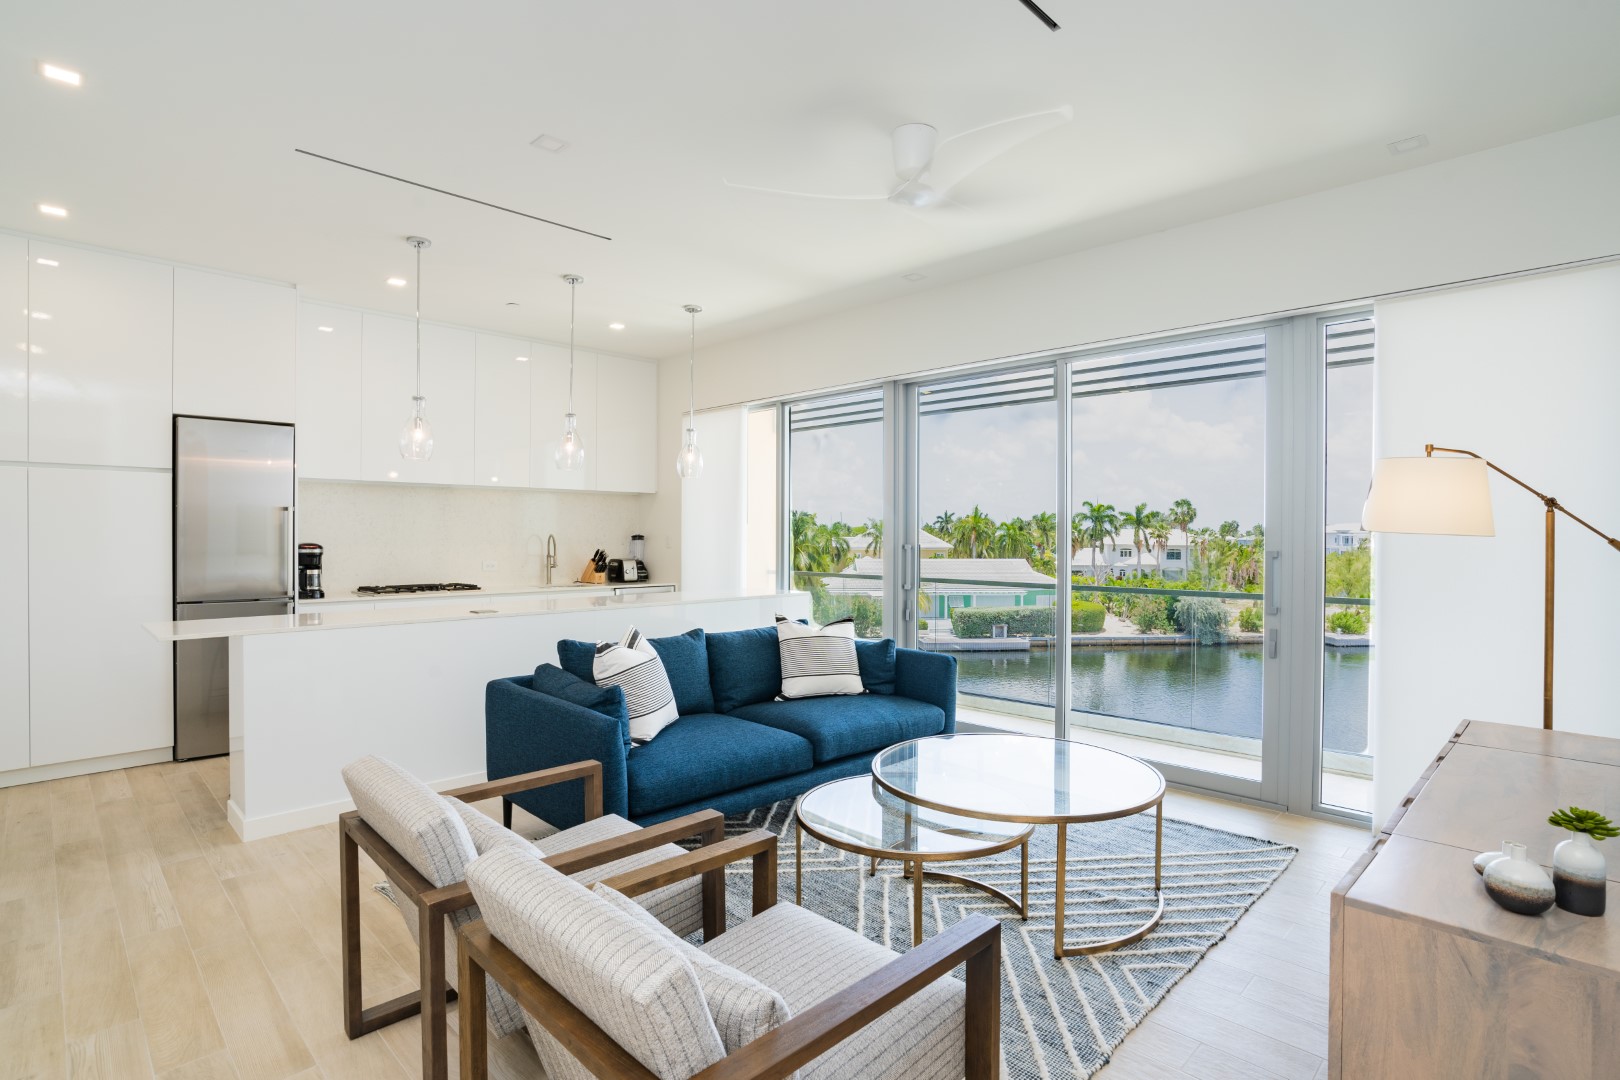 Condos on Seven Mile Beach - Living Room and Kitchen